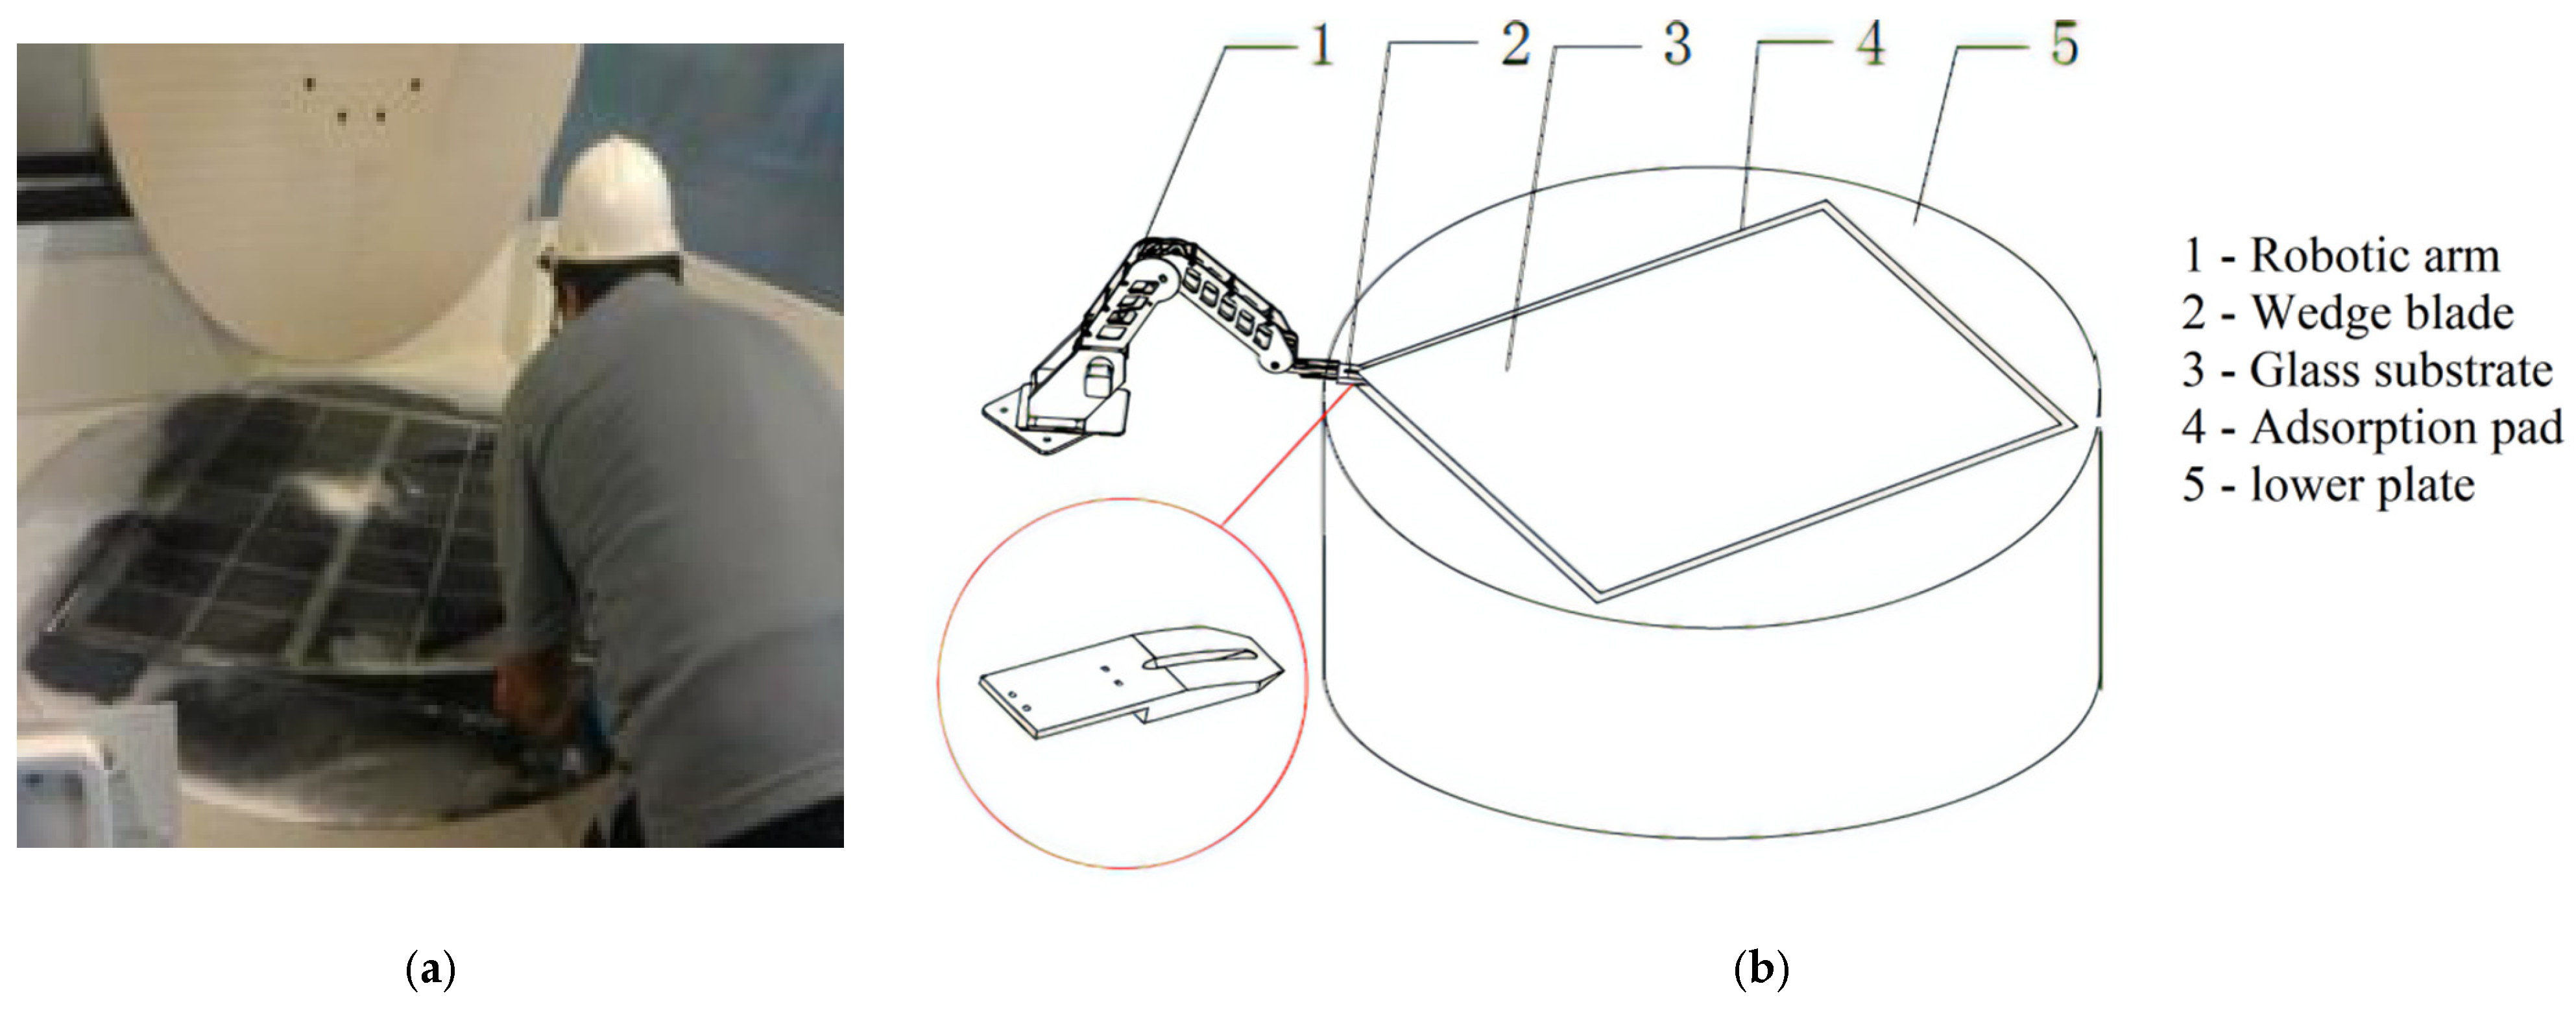 Sensors | Free Full-Text | Robotic Manipulation Planning for Automatic  Peeling of Glass Substrate Based on Online Learning Model Predictive Path  Integral